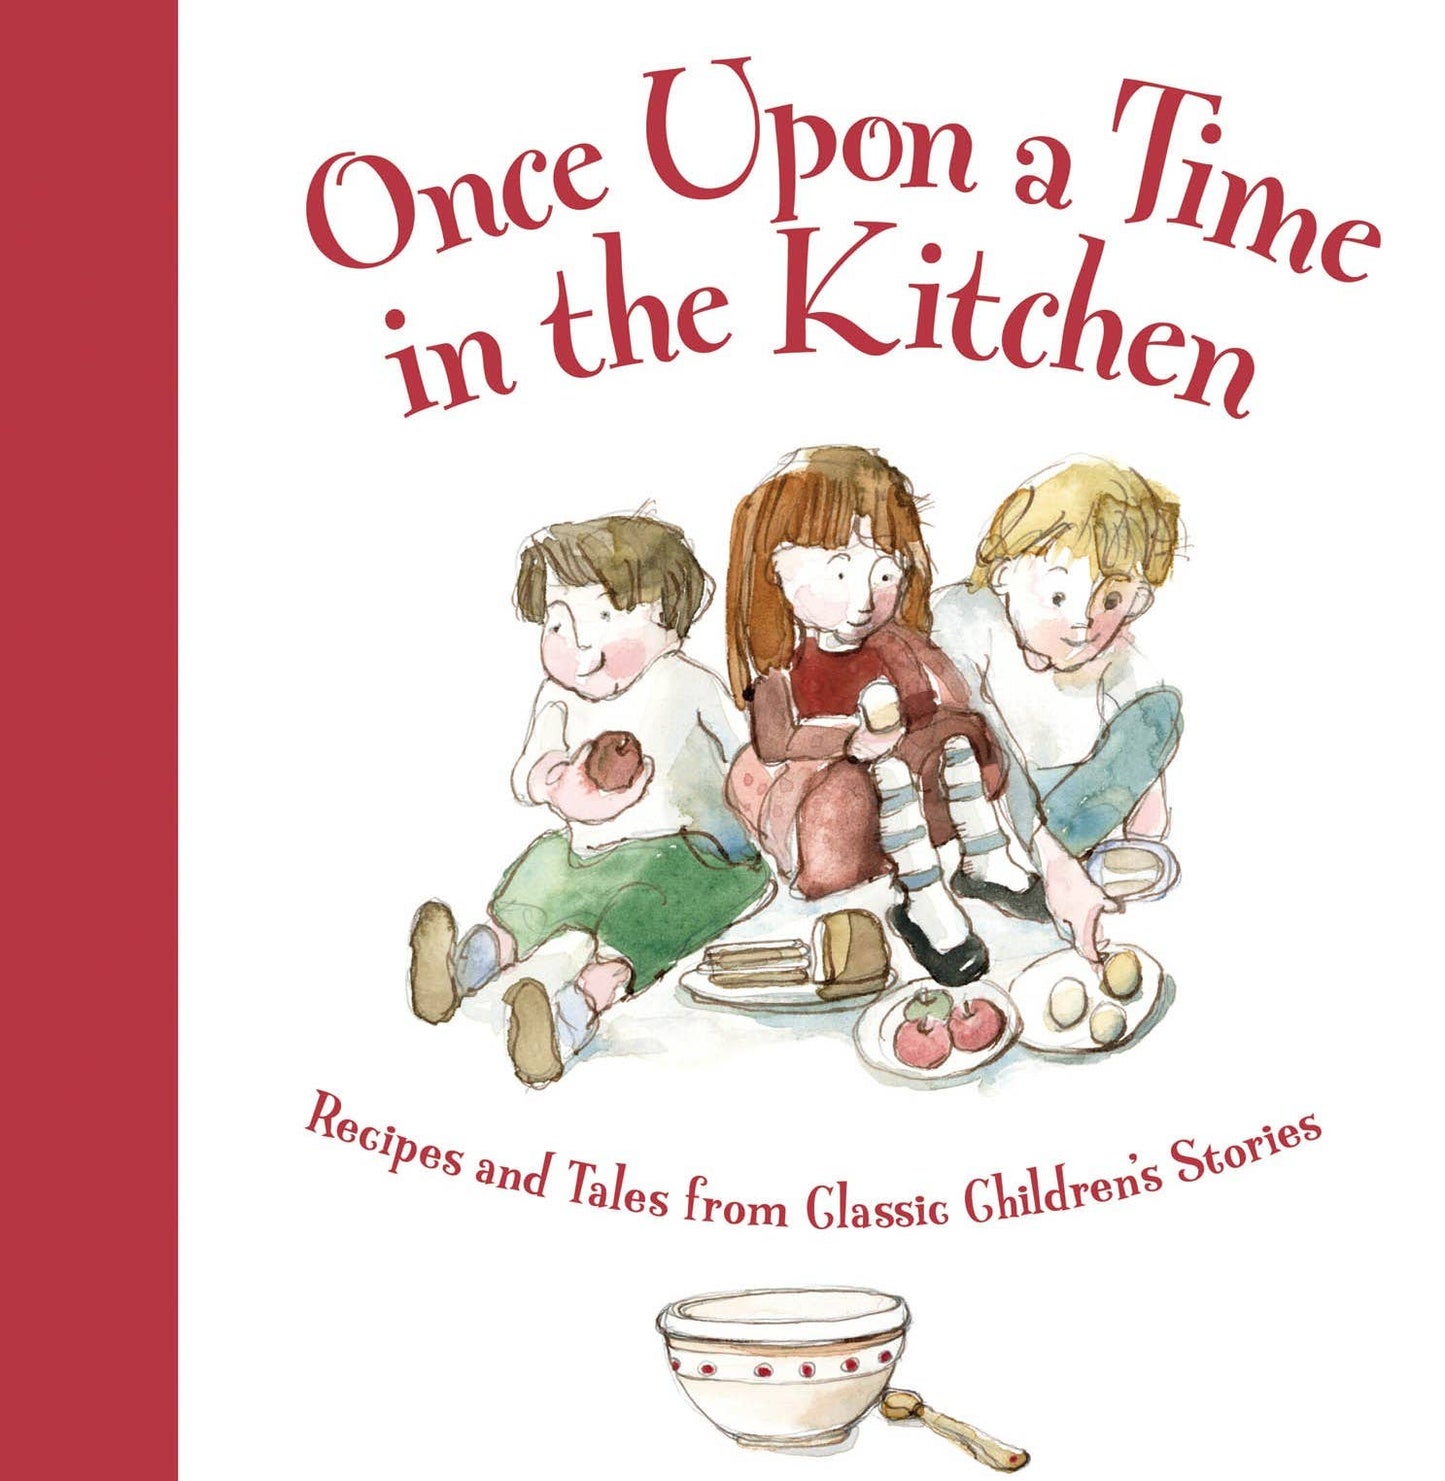 Once Upon a Time in the Kitchen, a children's cookbook